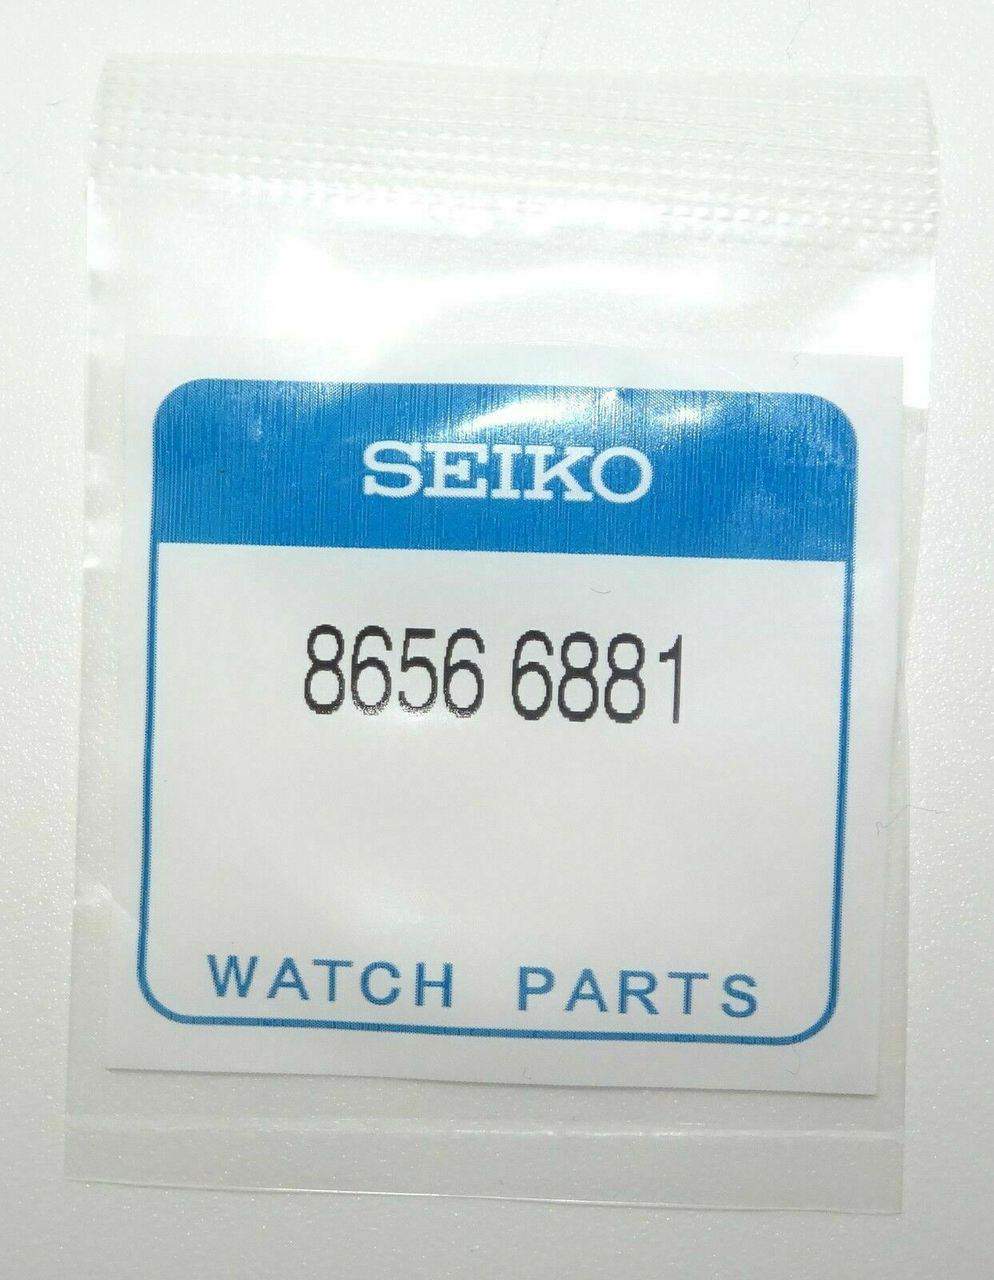 Seiko Gasket For Crystal For Seiko 7T32-7C60 7N33-0AB0 p/n 86566881 –  Maddisons UK